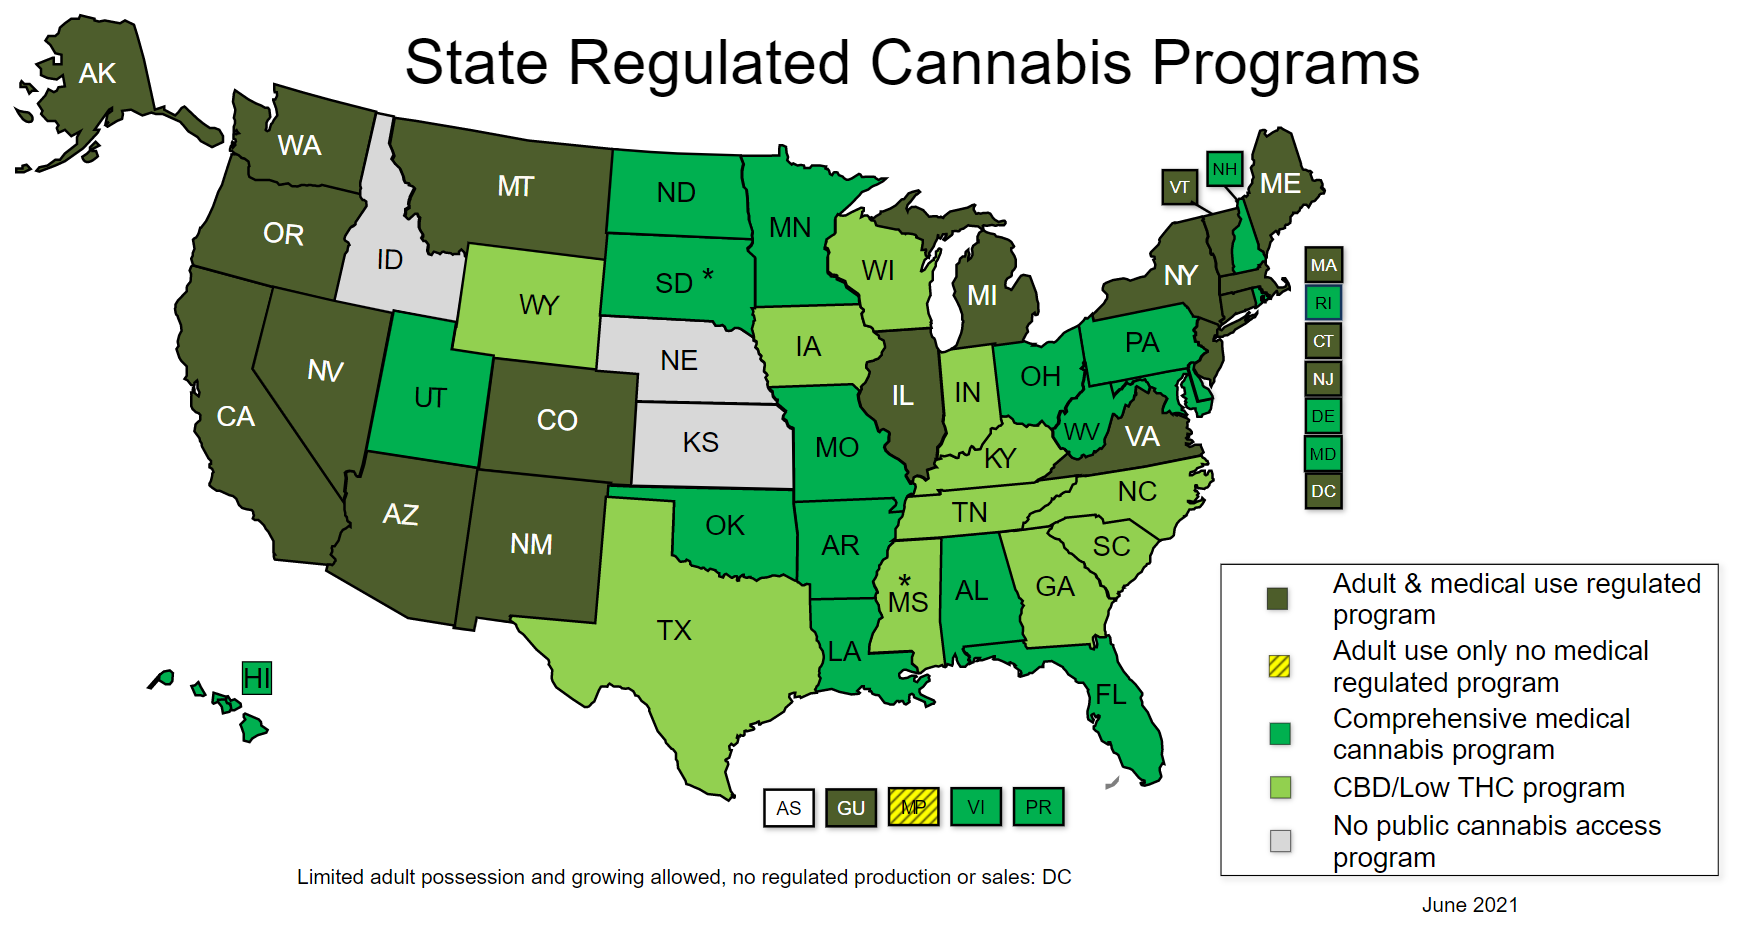 An infographic outlining State Regulated Cannabis Programs from June 2021.